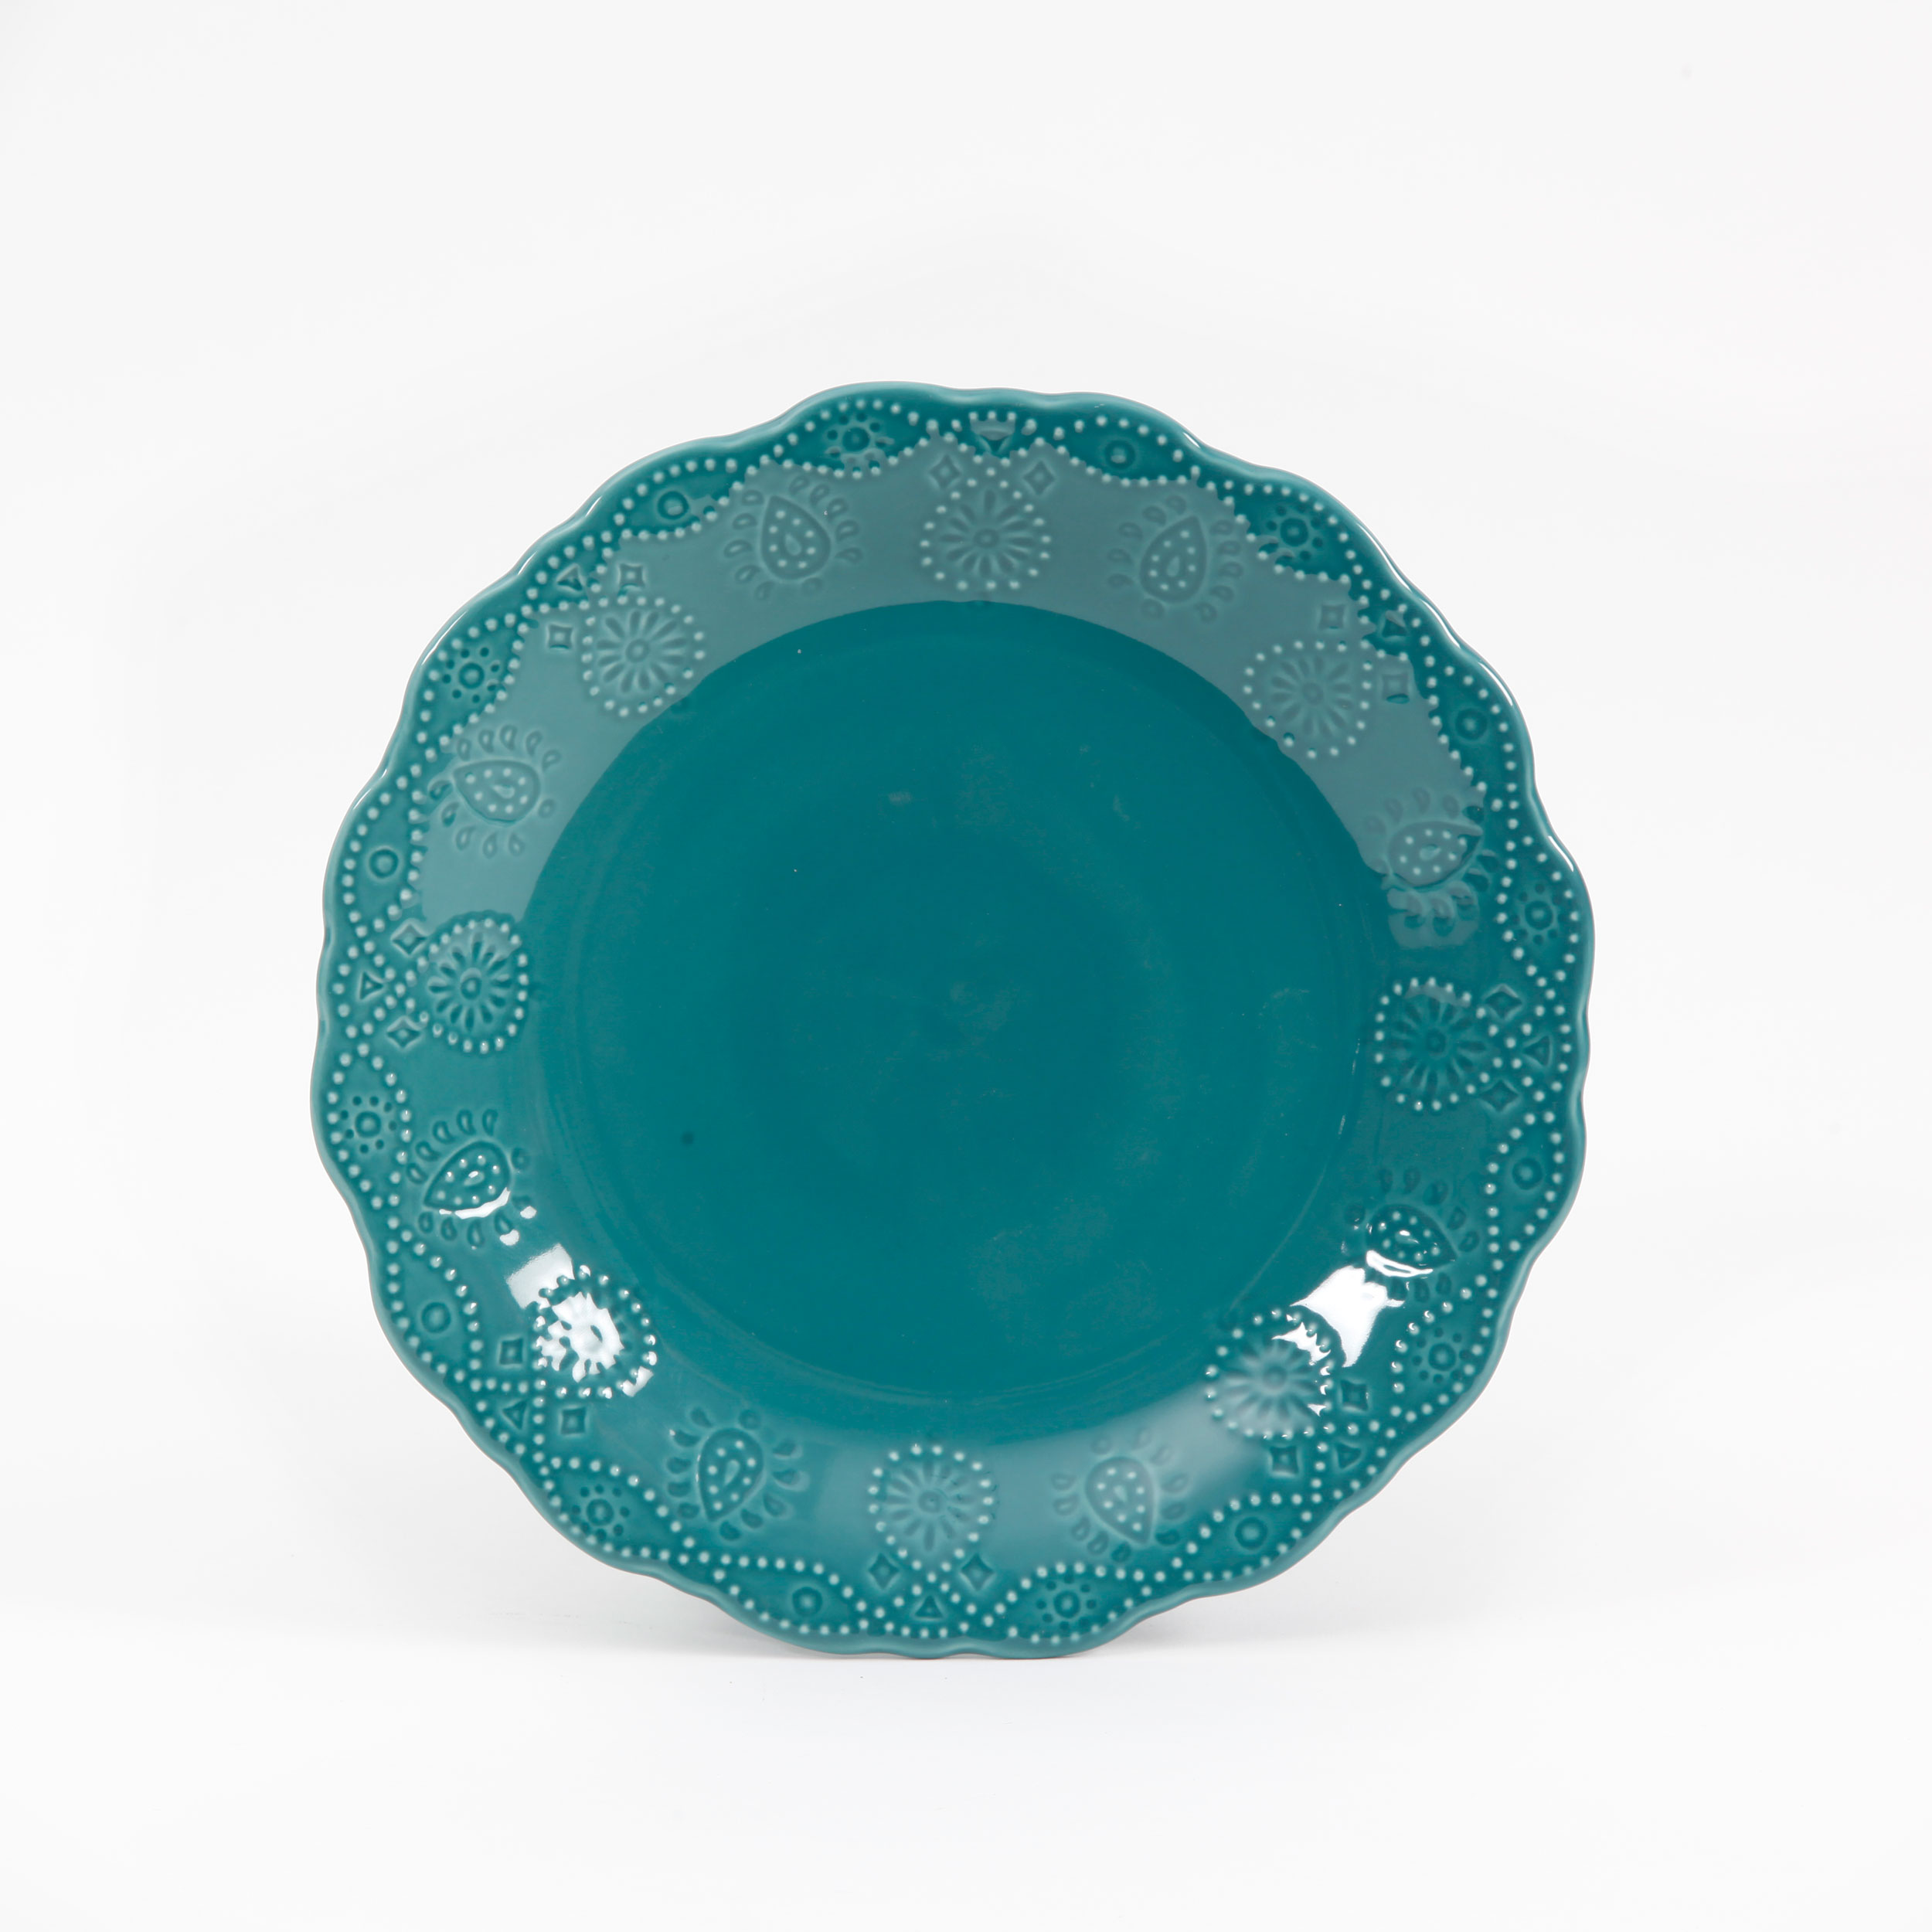 The Pioneer Woman Cowgirl Lace 12-Piece Dinnerware Set, Teal - image 4 of 7